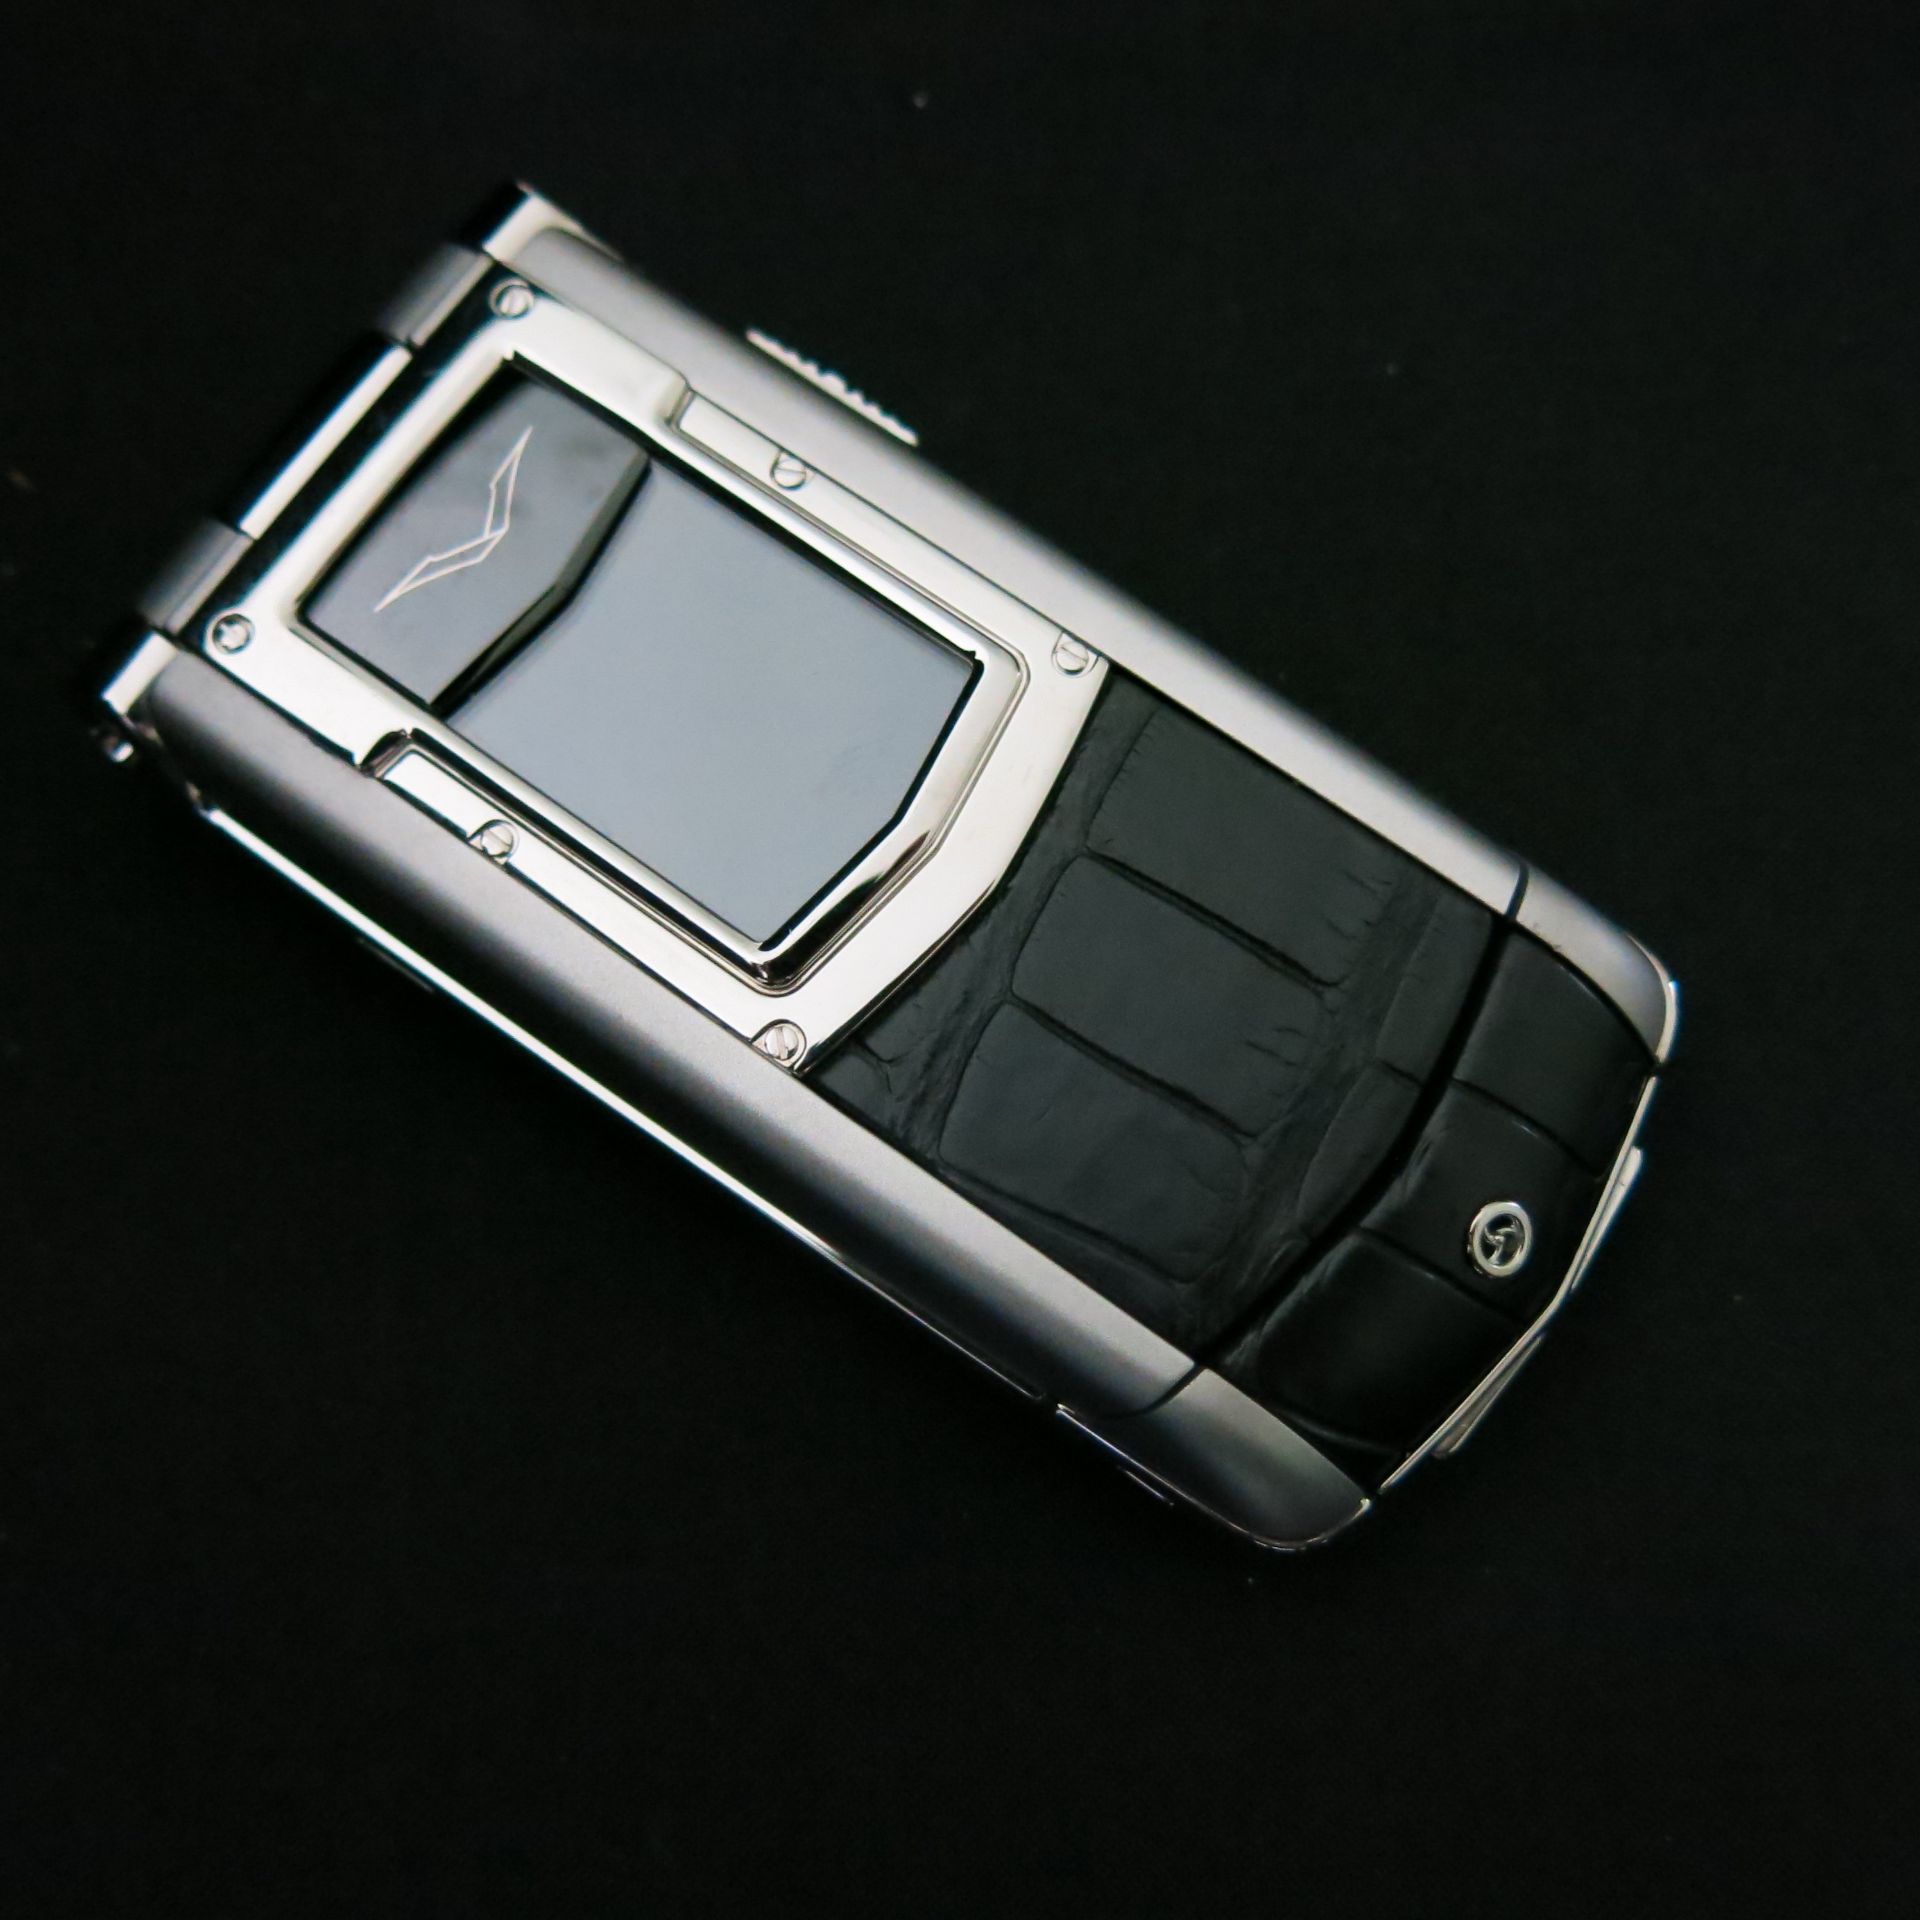 Entire Contents of the VERTU Museum Collection to Include: 105 Various Iconic Phones & Appearance - Image 64 of 106